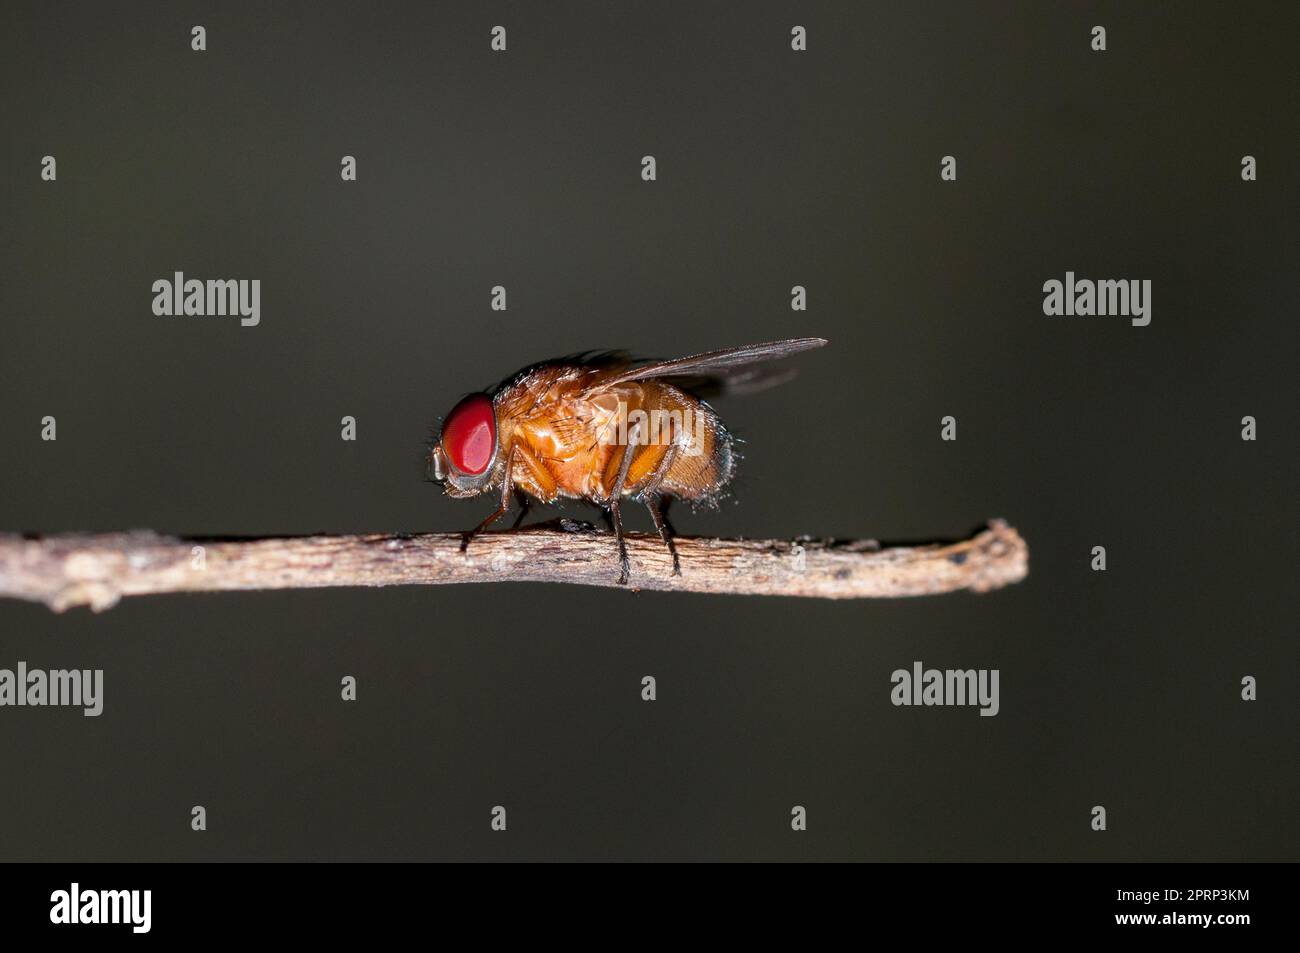 Fruit Fly, Drosophilidae Famil), Klungkung, Bali, Indonesia Foto Stock